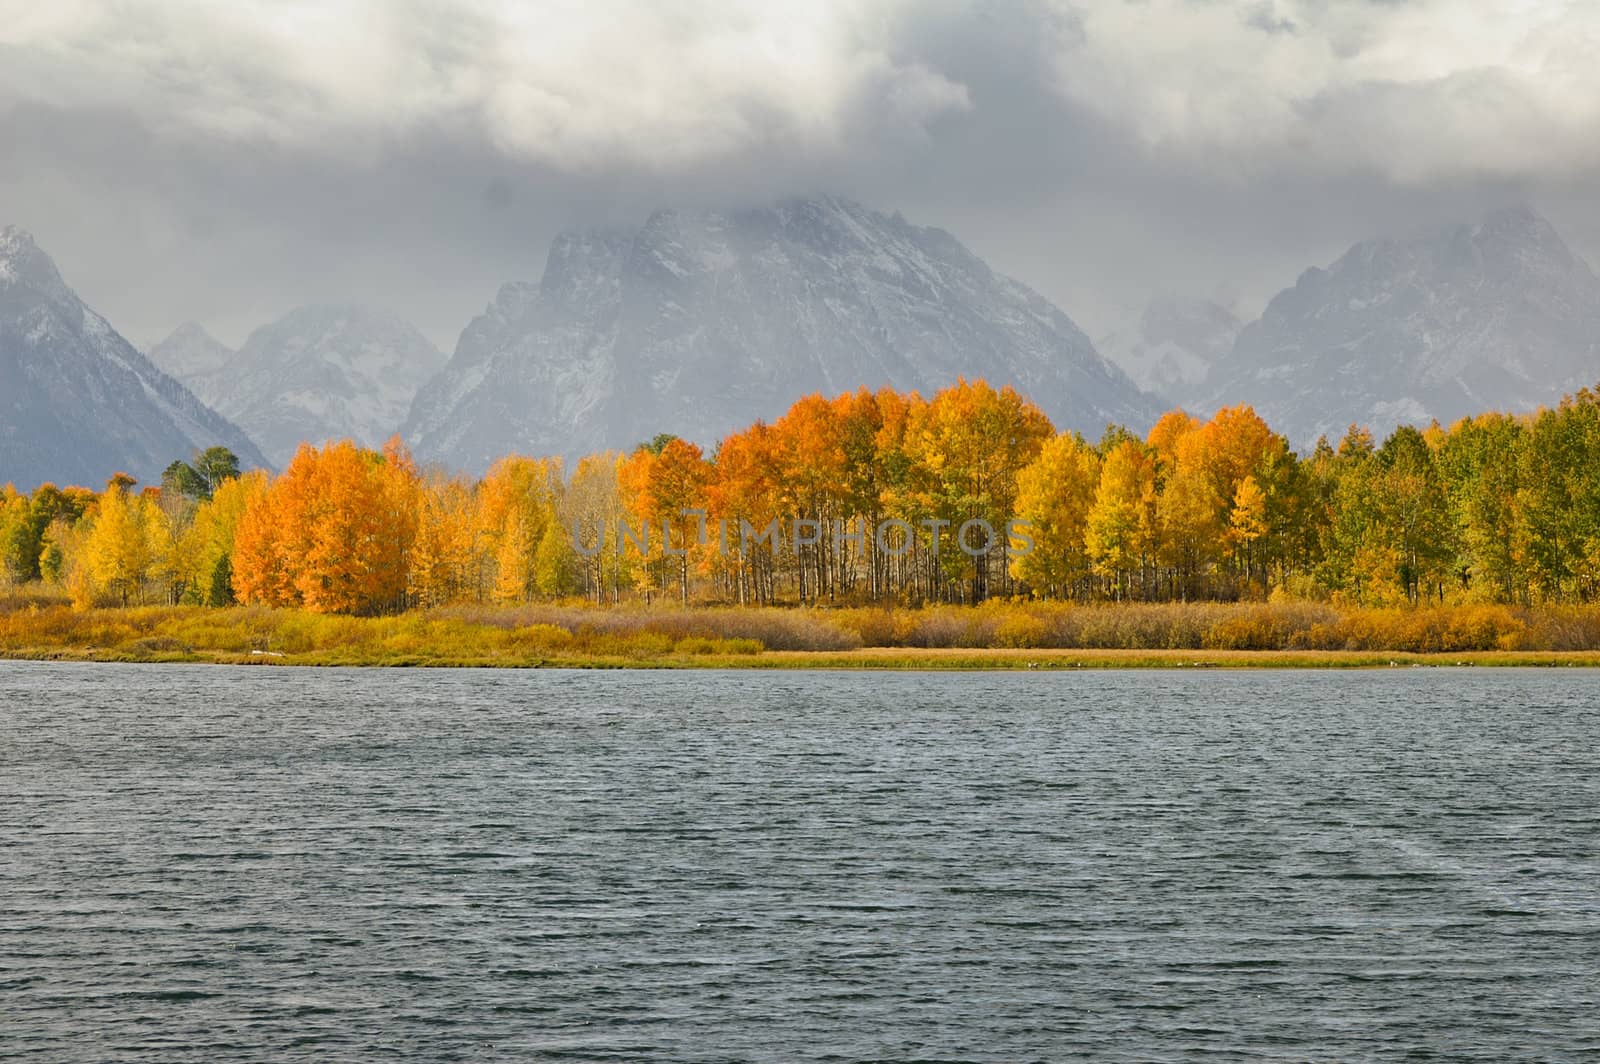 Fall colors on trees at Oxbow Bend rivers edge